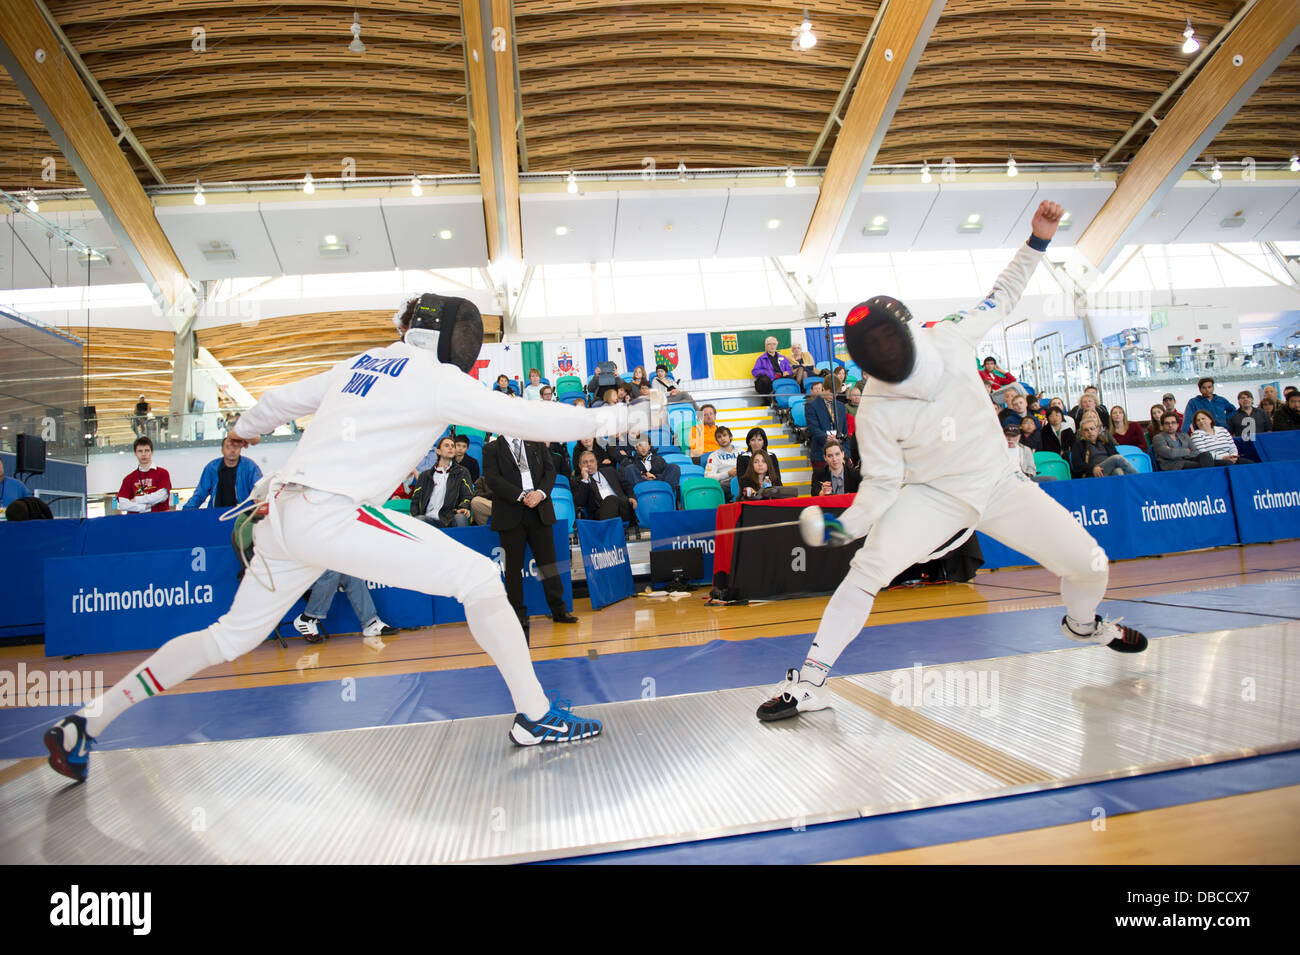 Vancouver Grand Prix of Men's Epee 2013 at Richmond Olympic Oval